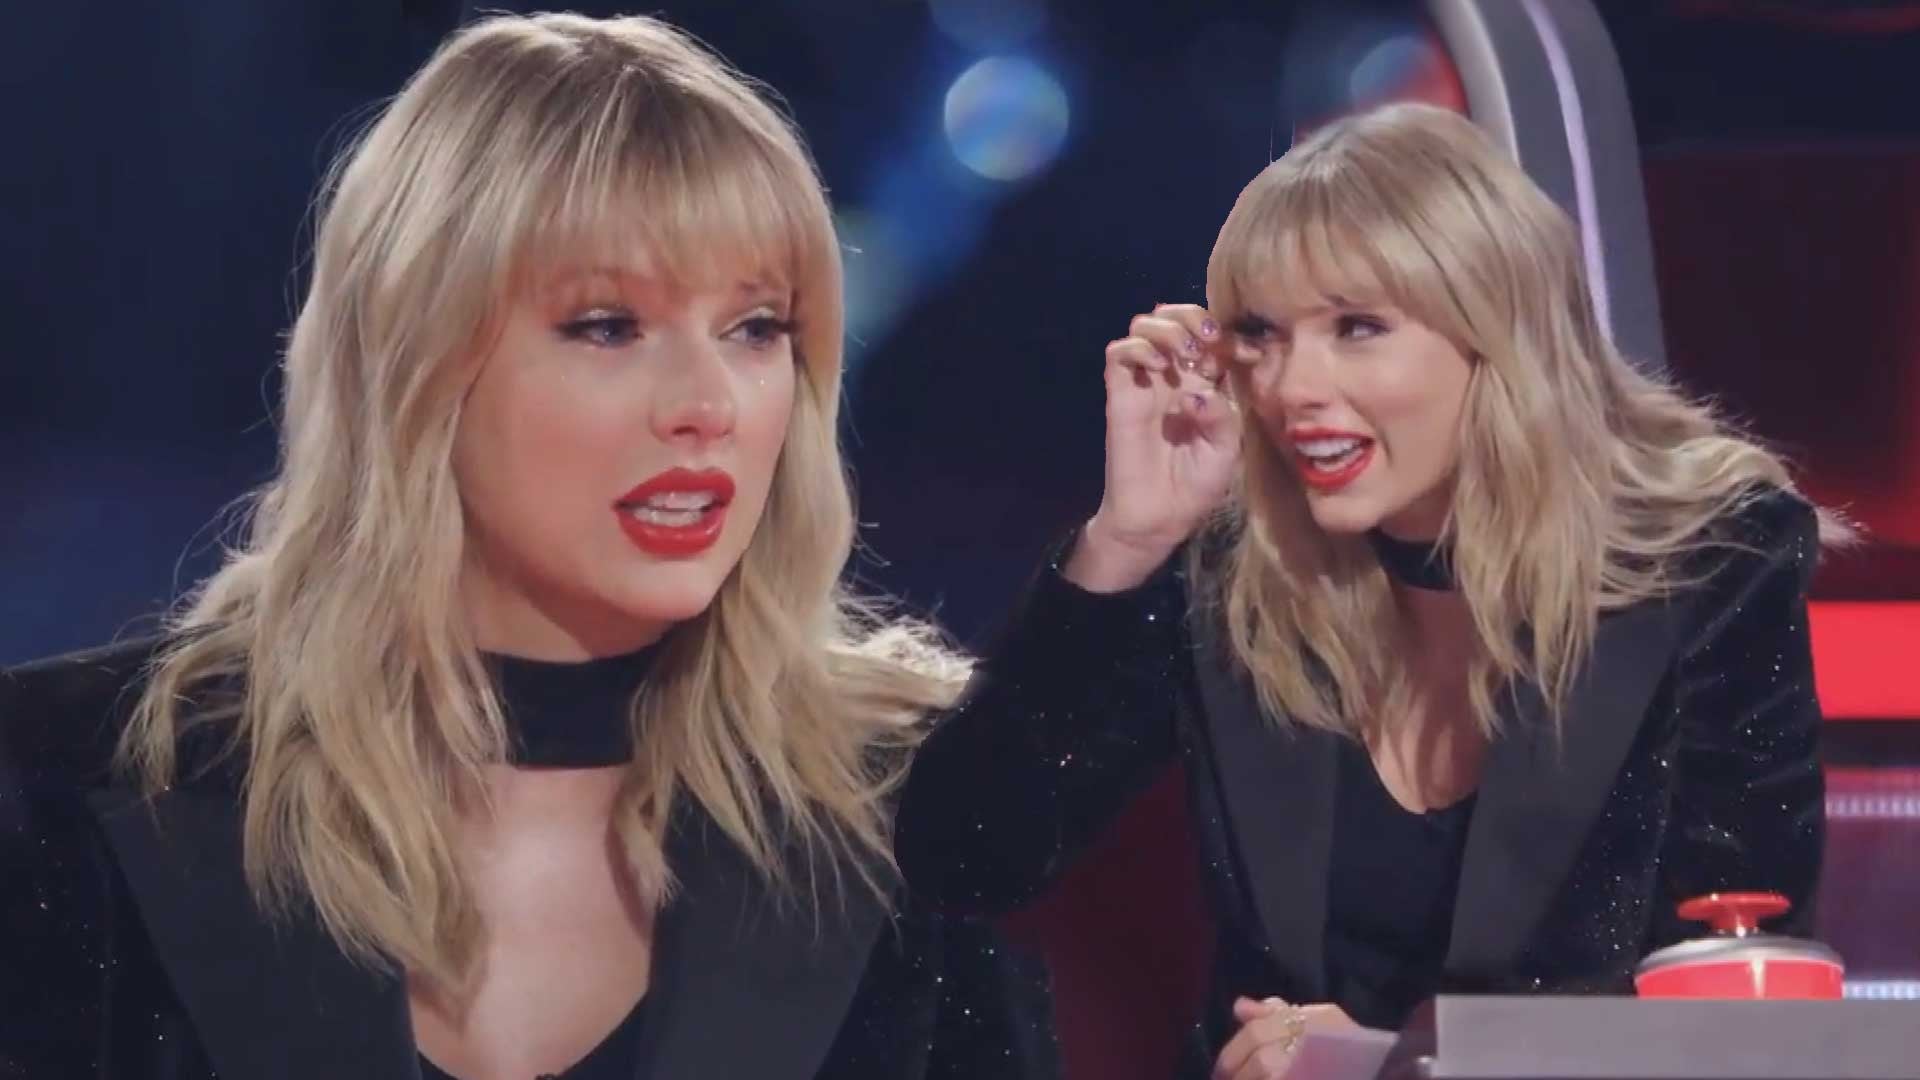 Taylor Swift Gets Emotional on 'The Voice'